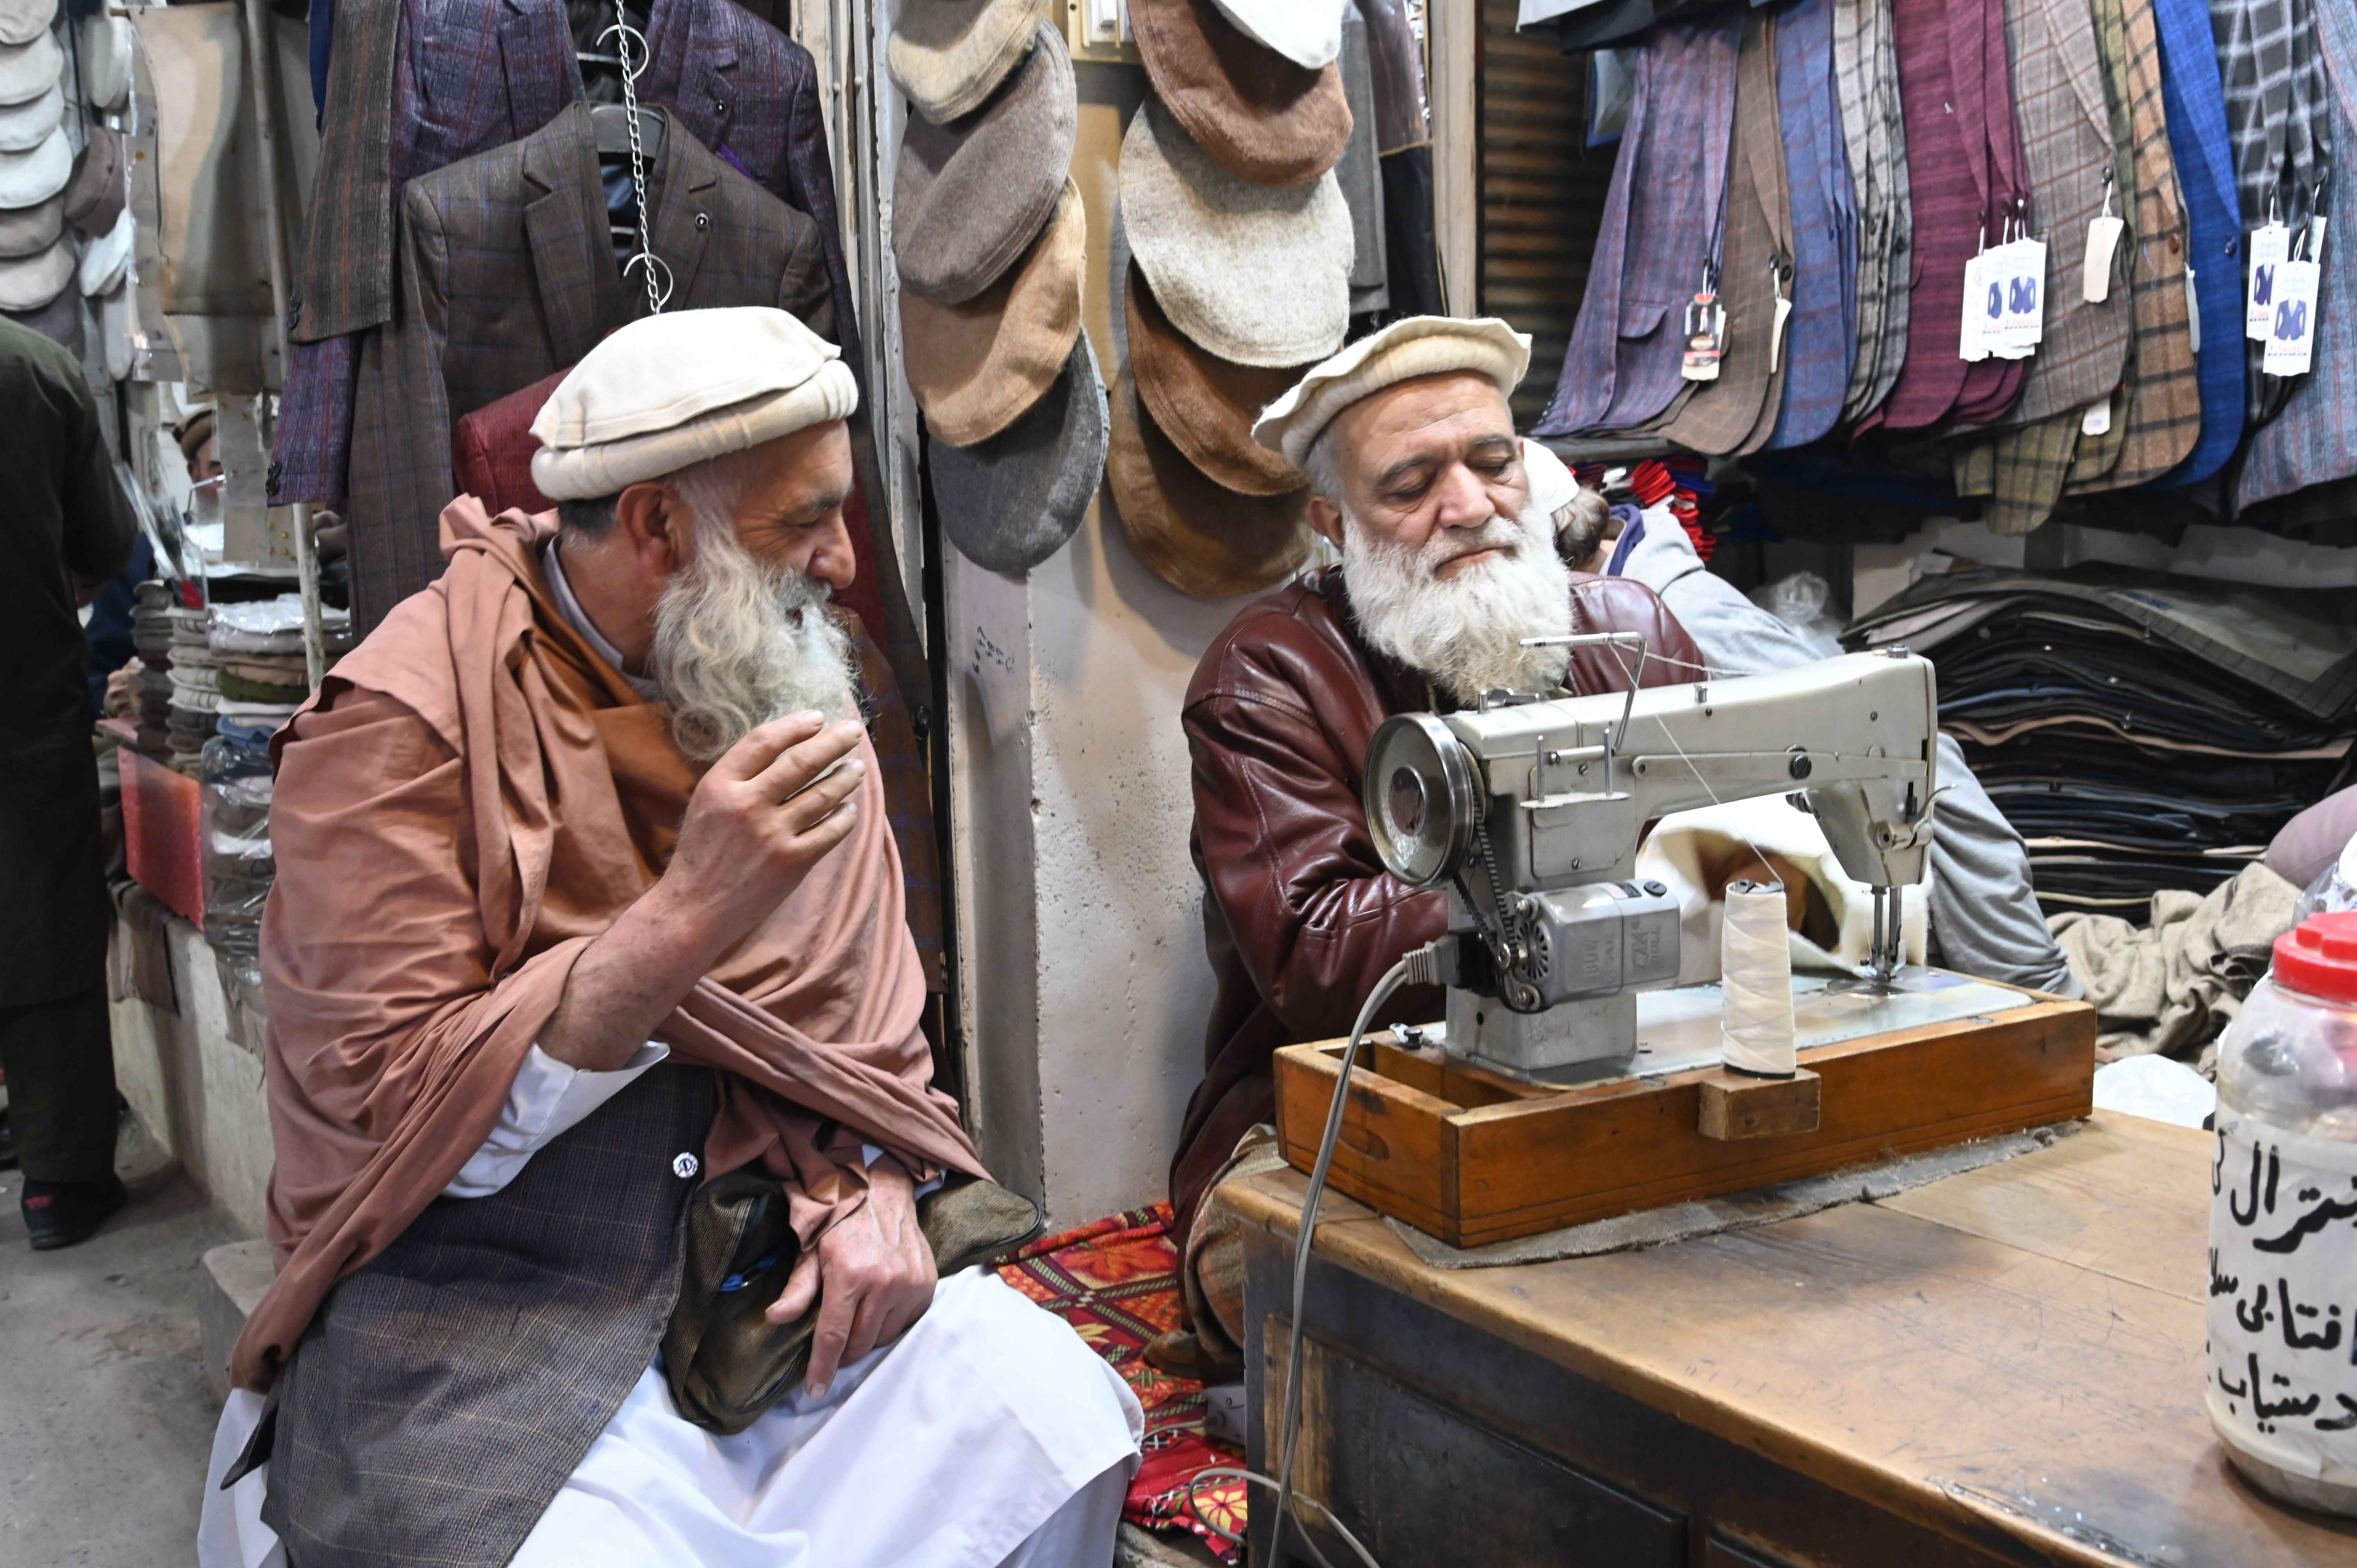 A tailor busy in stitching the warm cloths